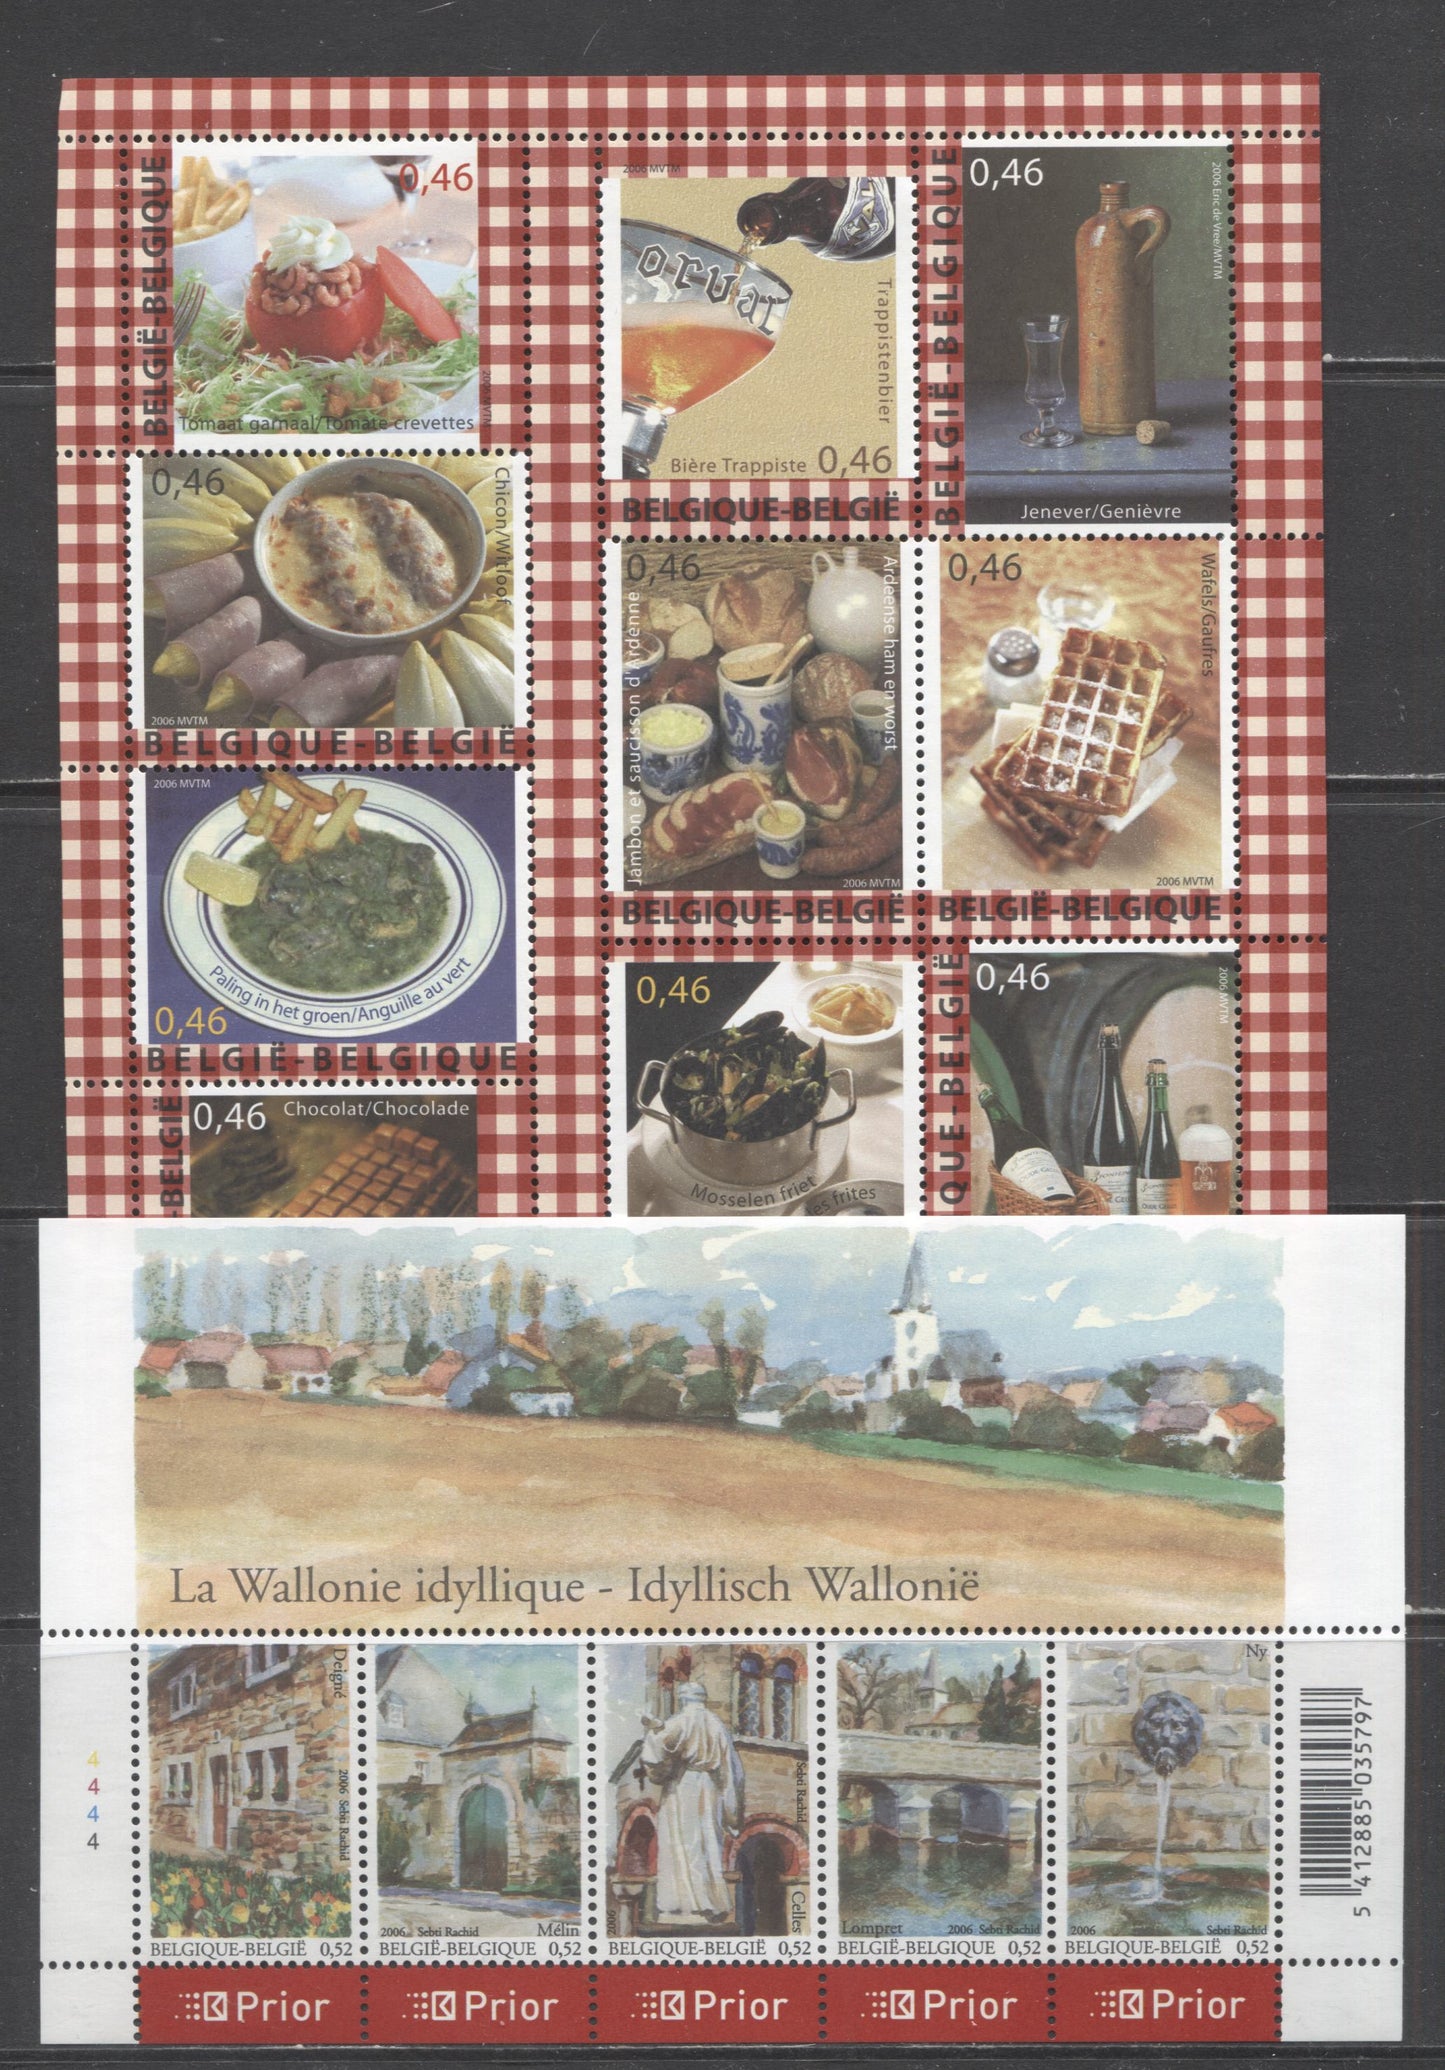 Lot 92 Belgium SC#2157/2177 2006 Scenes of Wallonian Villages - Belgian Foods & Beverages Issues,  2 VFNH Miniature Sheets, Click on Listing to See ALL Pictures, 2017 Scott Cat. $20